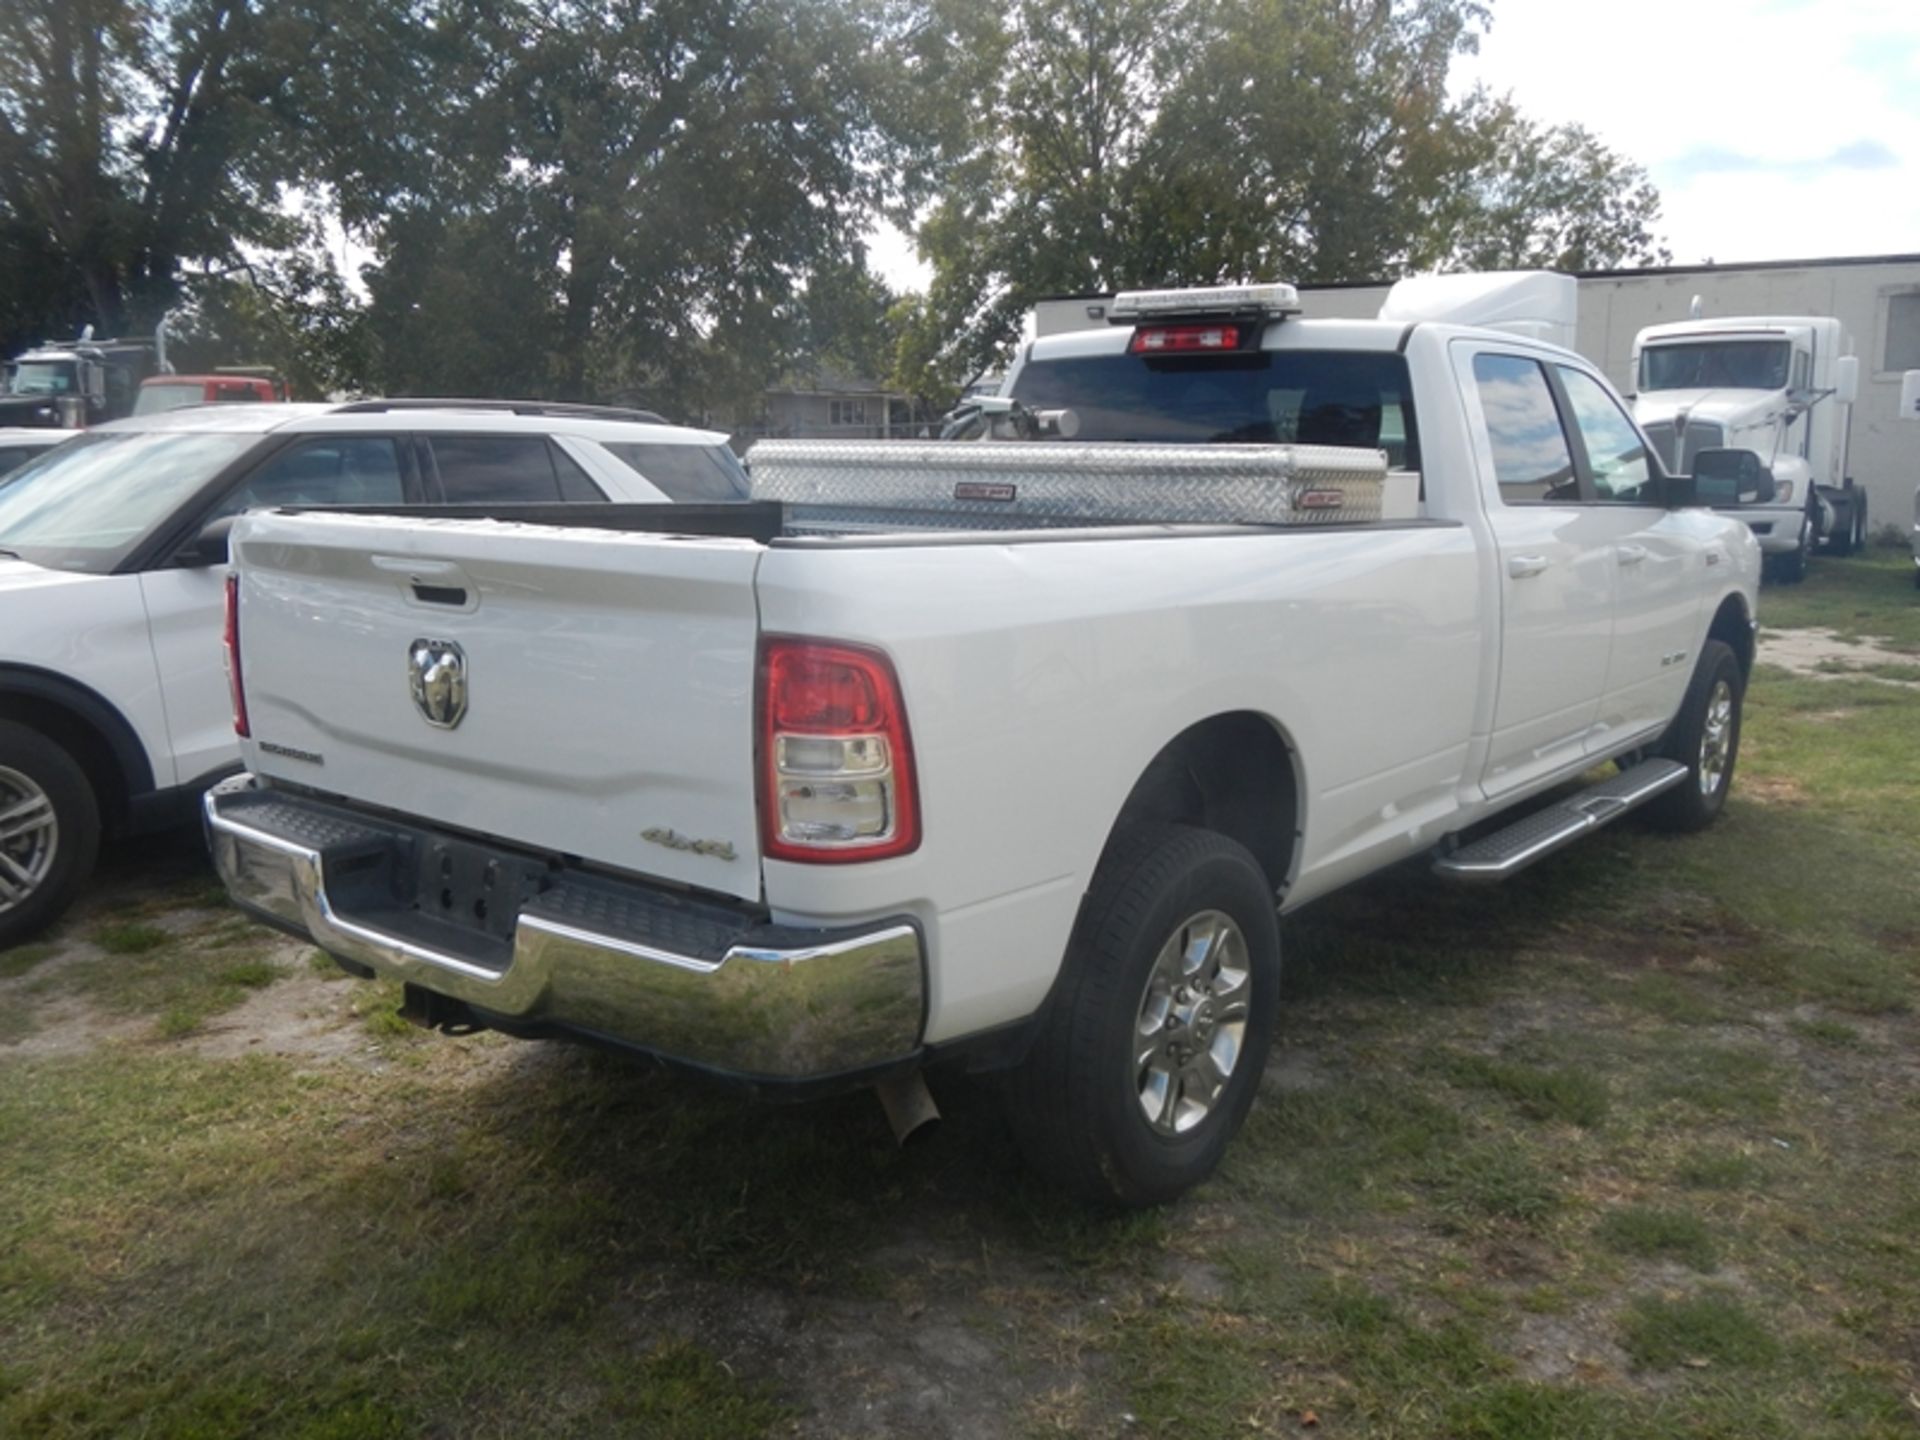 2021 RAM 2500 6.4L Hemi gas, crew cab, long bed, 4wd, Big Horn trim package dent in side of bed - - Bild 4 aus 8